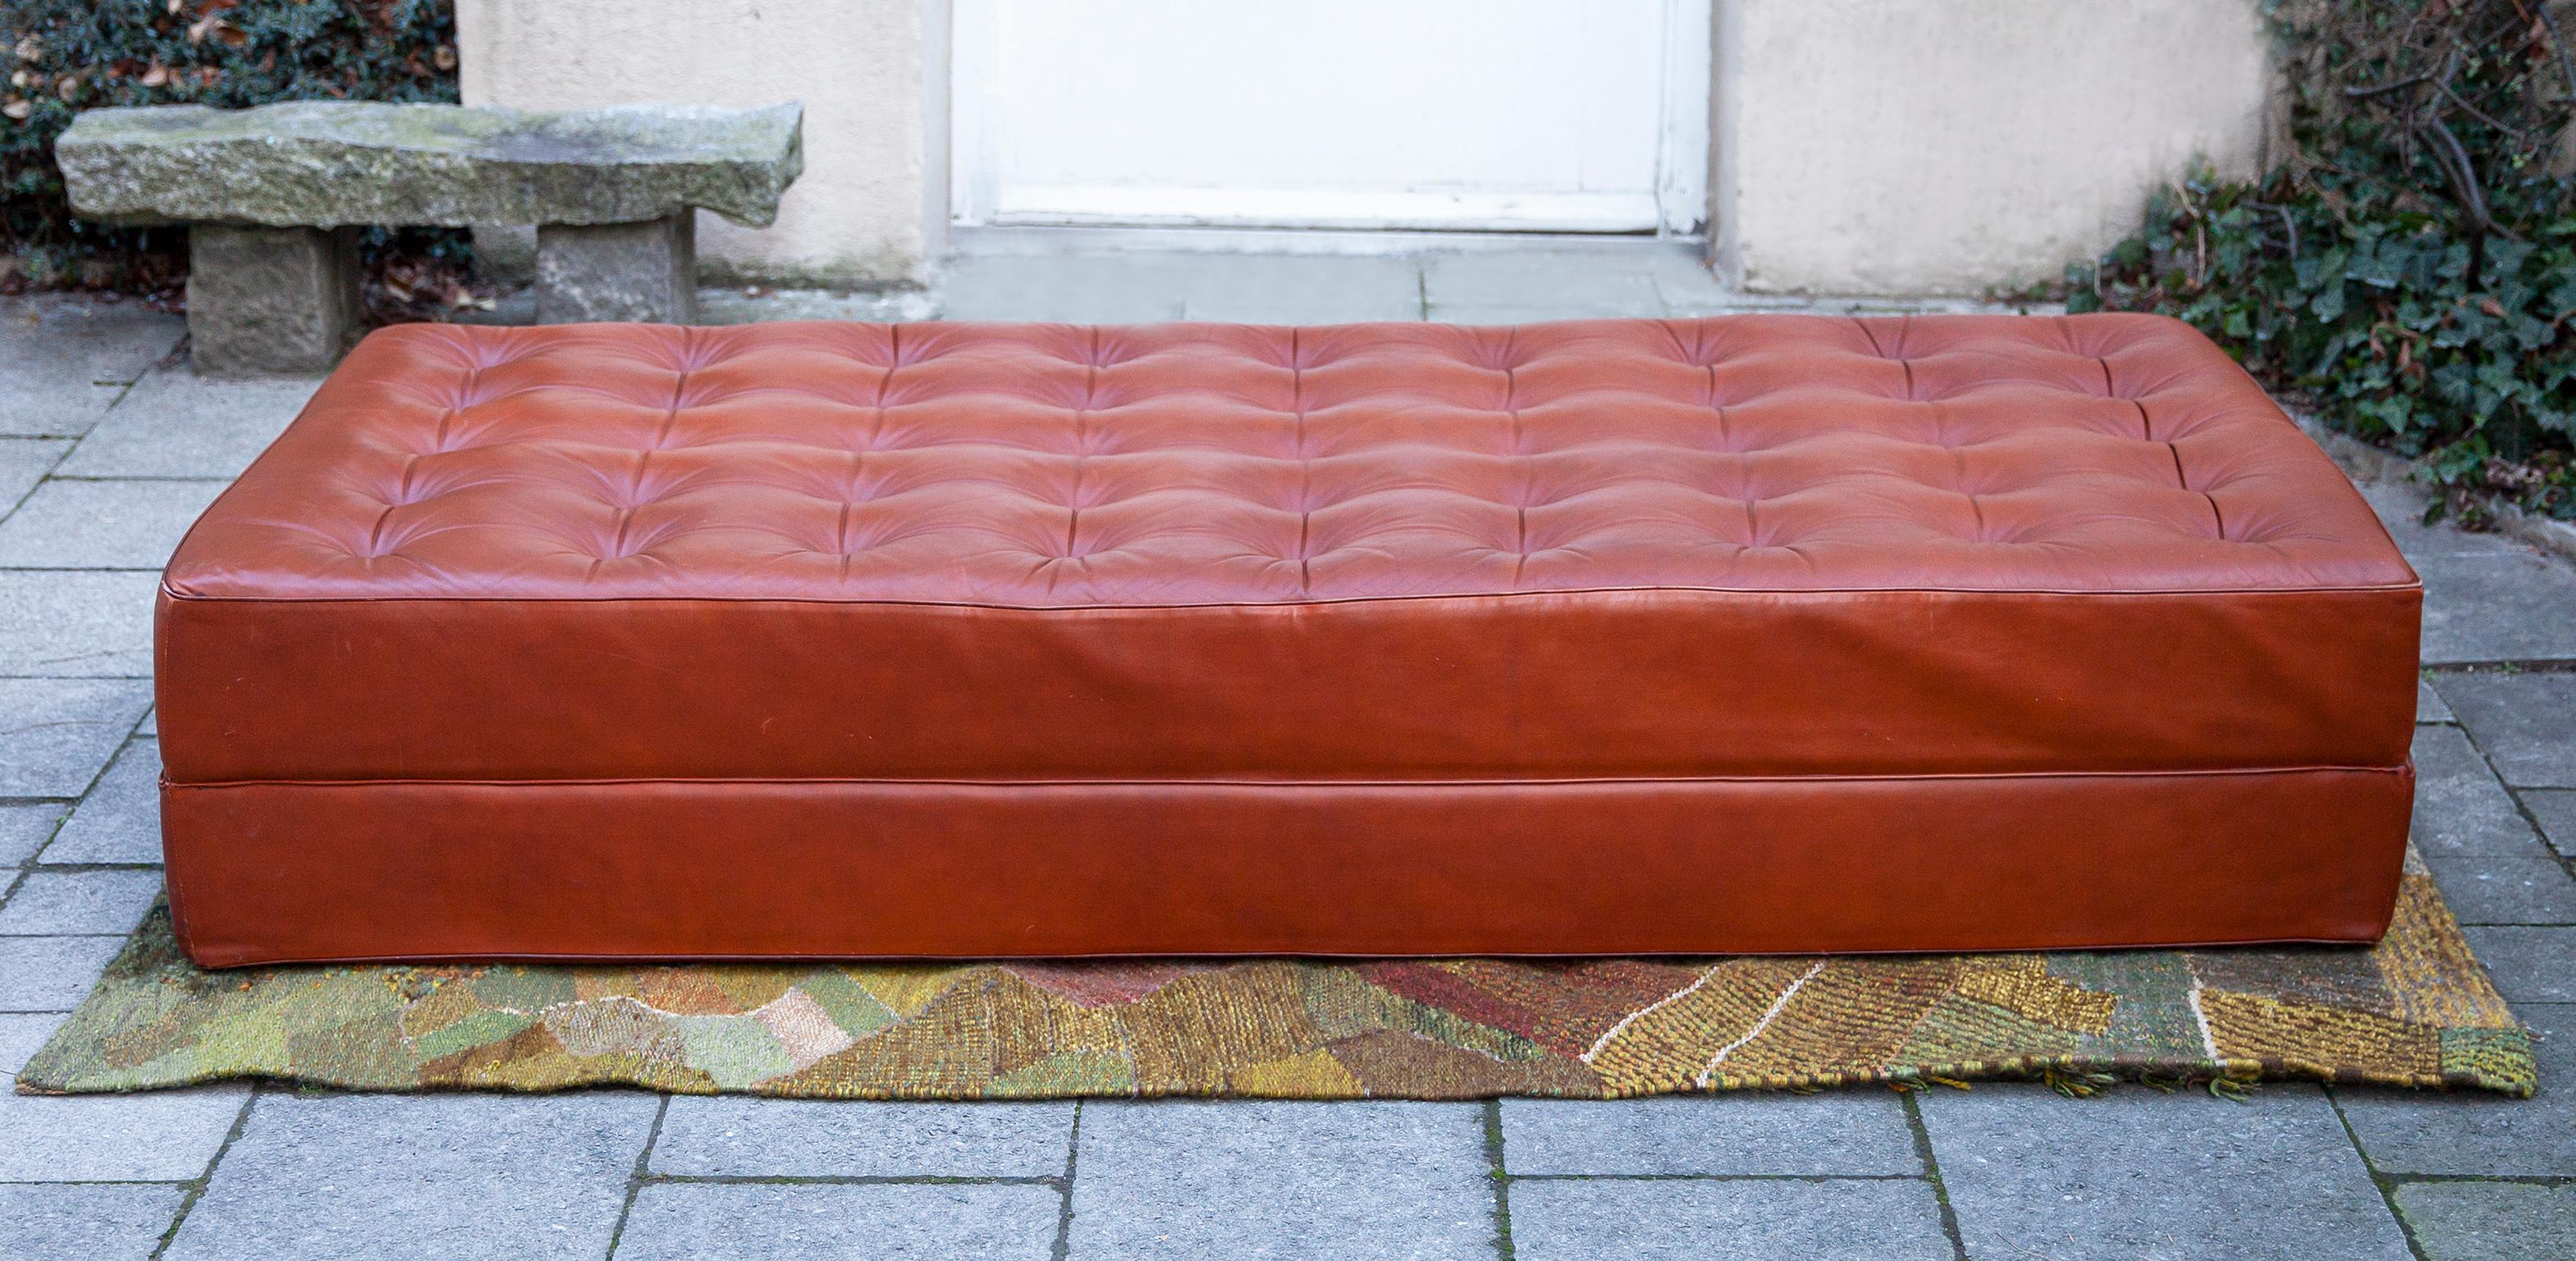 Very rare daybed by Alfred Kill International attributed to Horst Brüning, made in Germany, 1970s.

The daybed can be easily turned in a comfortable double bed. Very good vintage condition in, original brown cognac leather, soft foam and a linen